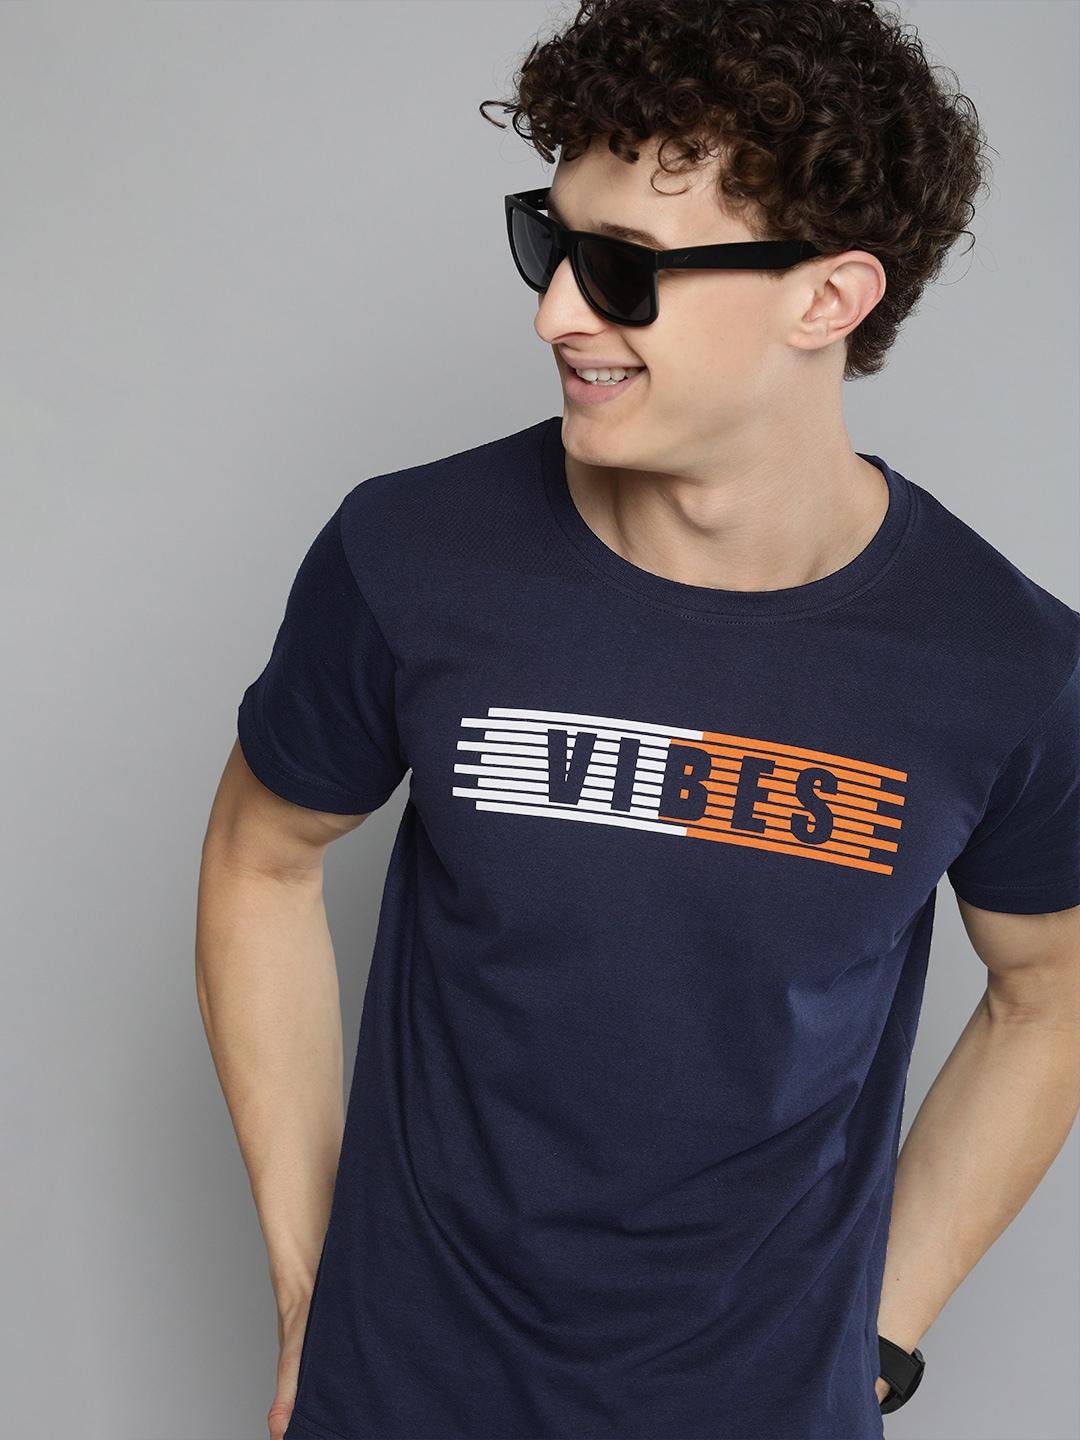 here&now men navy blue typography printed t-shirt